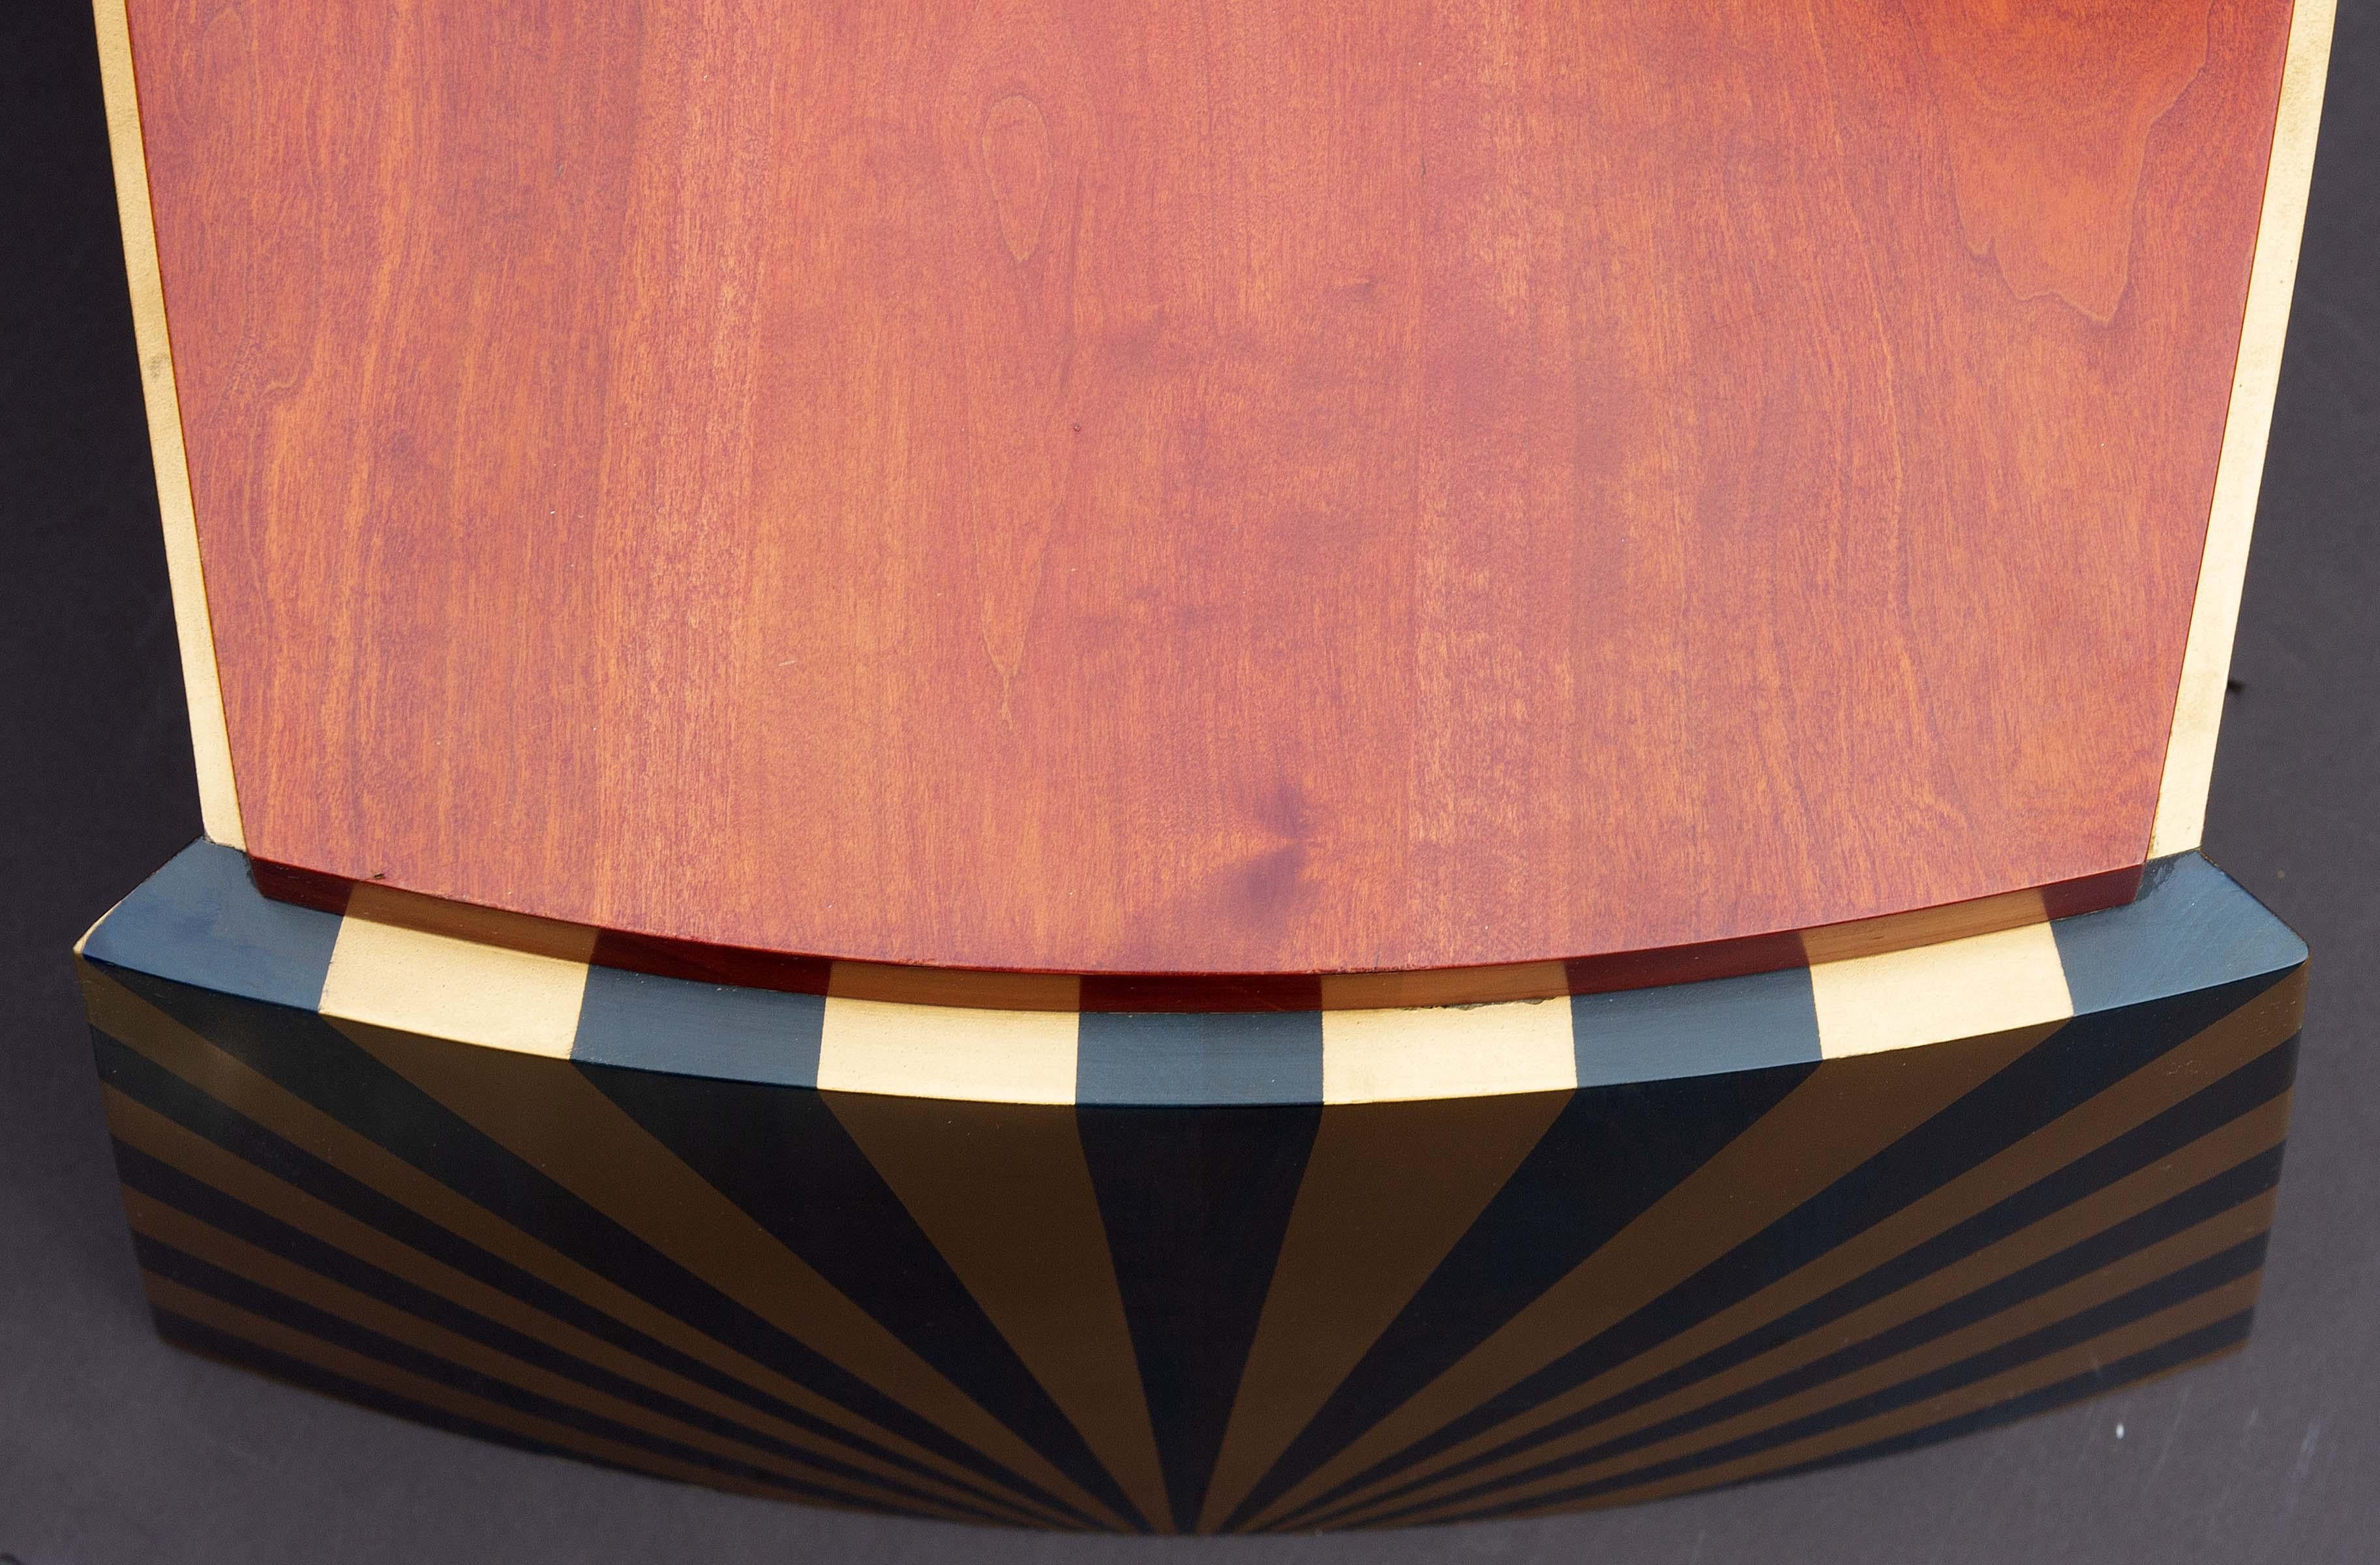 A unique handmade sculptural coffee table. Designed after the  mask of Tutankhamun. Made by Joseph Dasta. 1990. Solid cherry, aniline dye, lacquer. Hand rubbed finish. Hand planed boards. Hand cut joints. History of the table: I made this table in